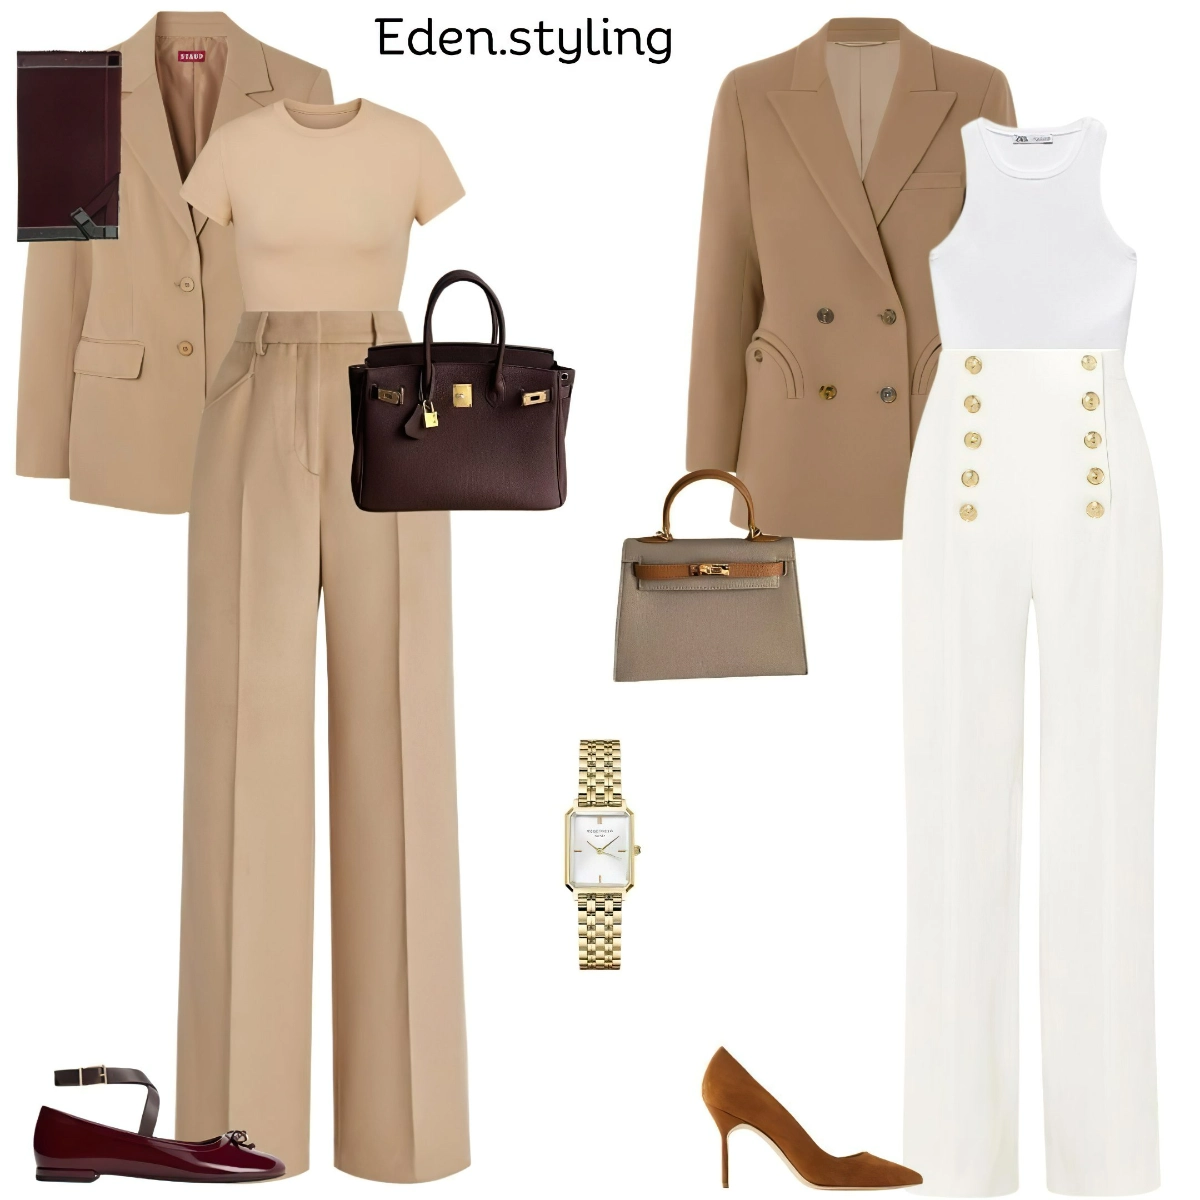 old money aesthetic outfit ideen komplette kleidungsets frauen business mode